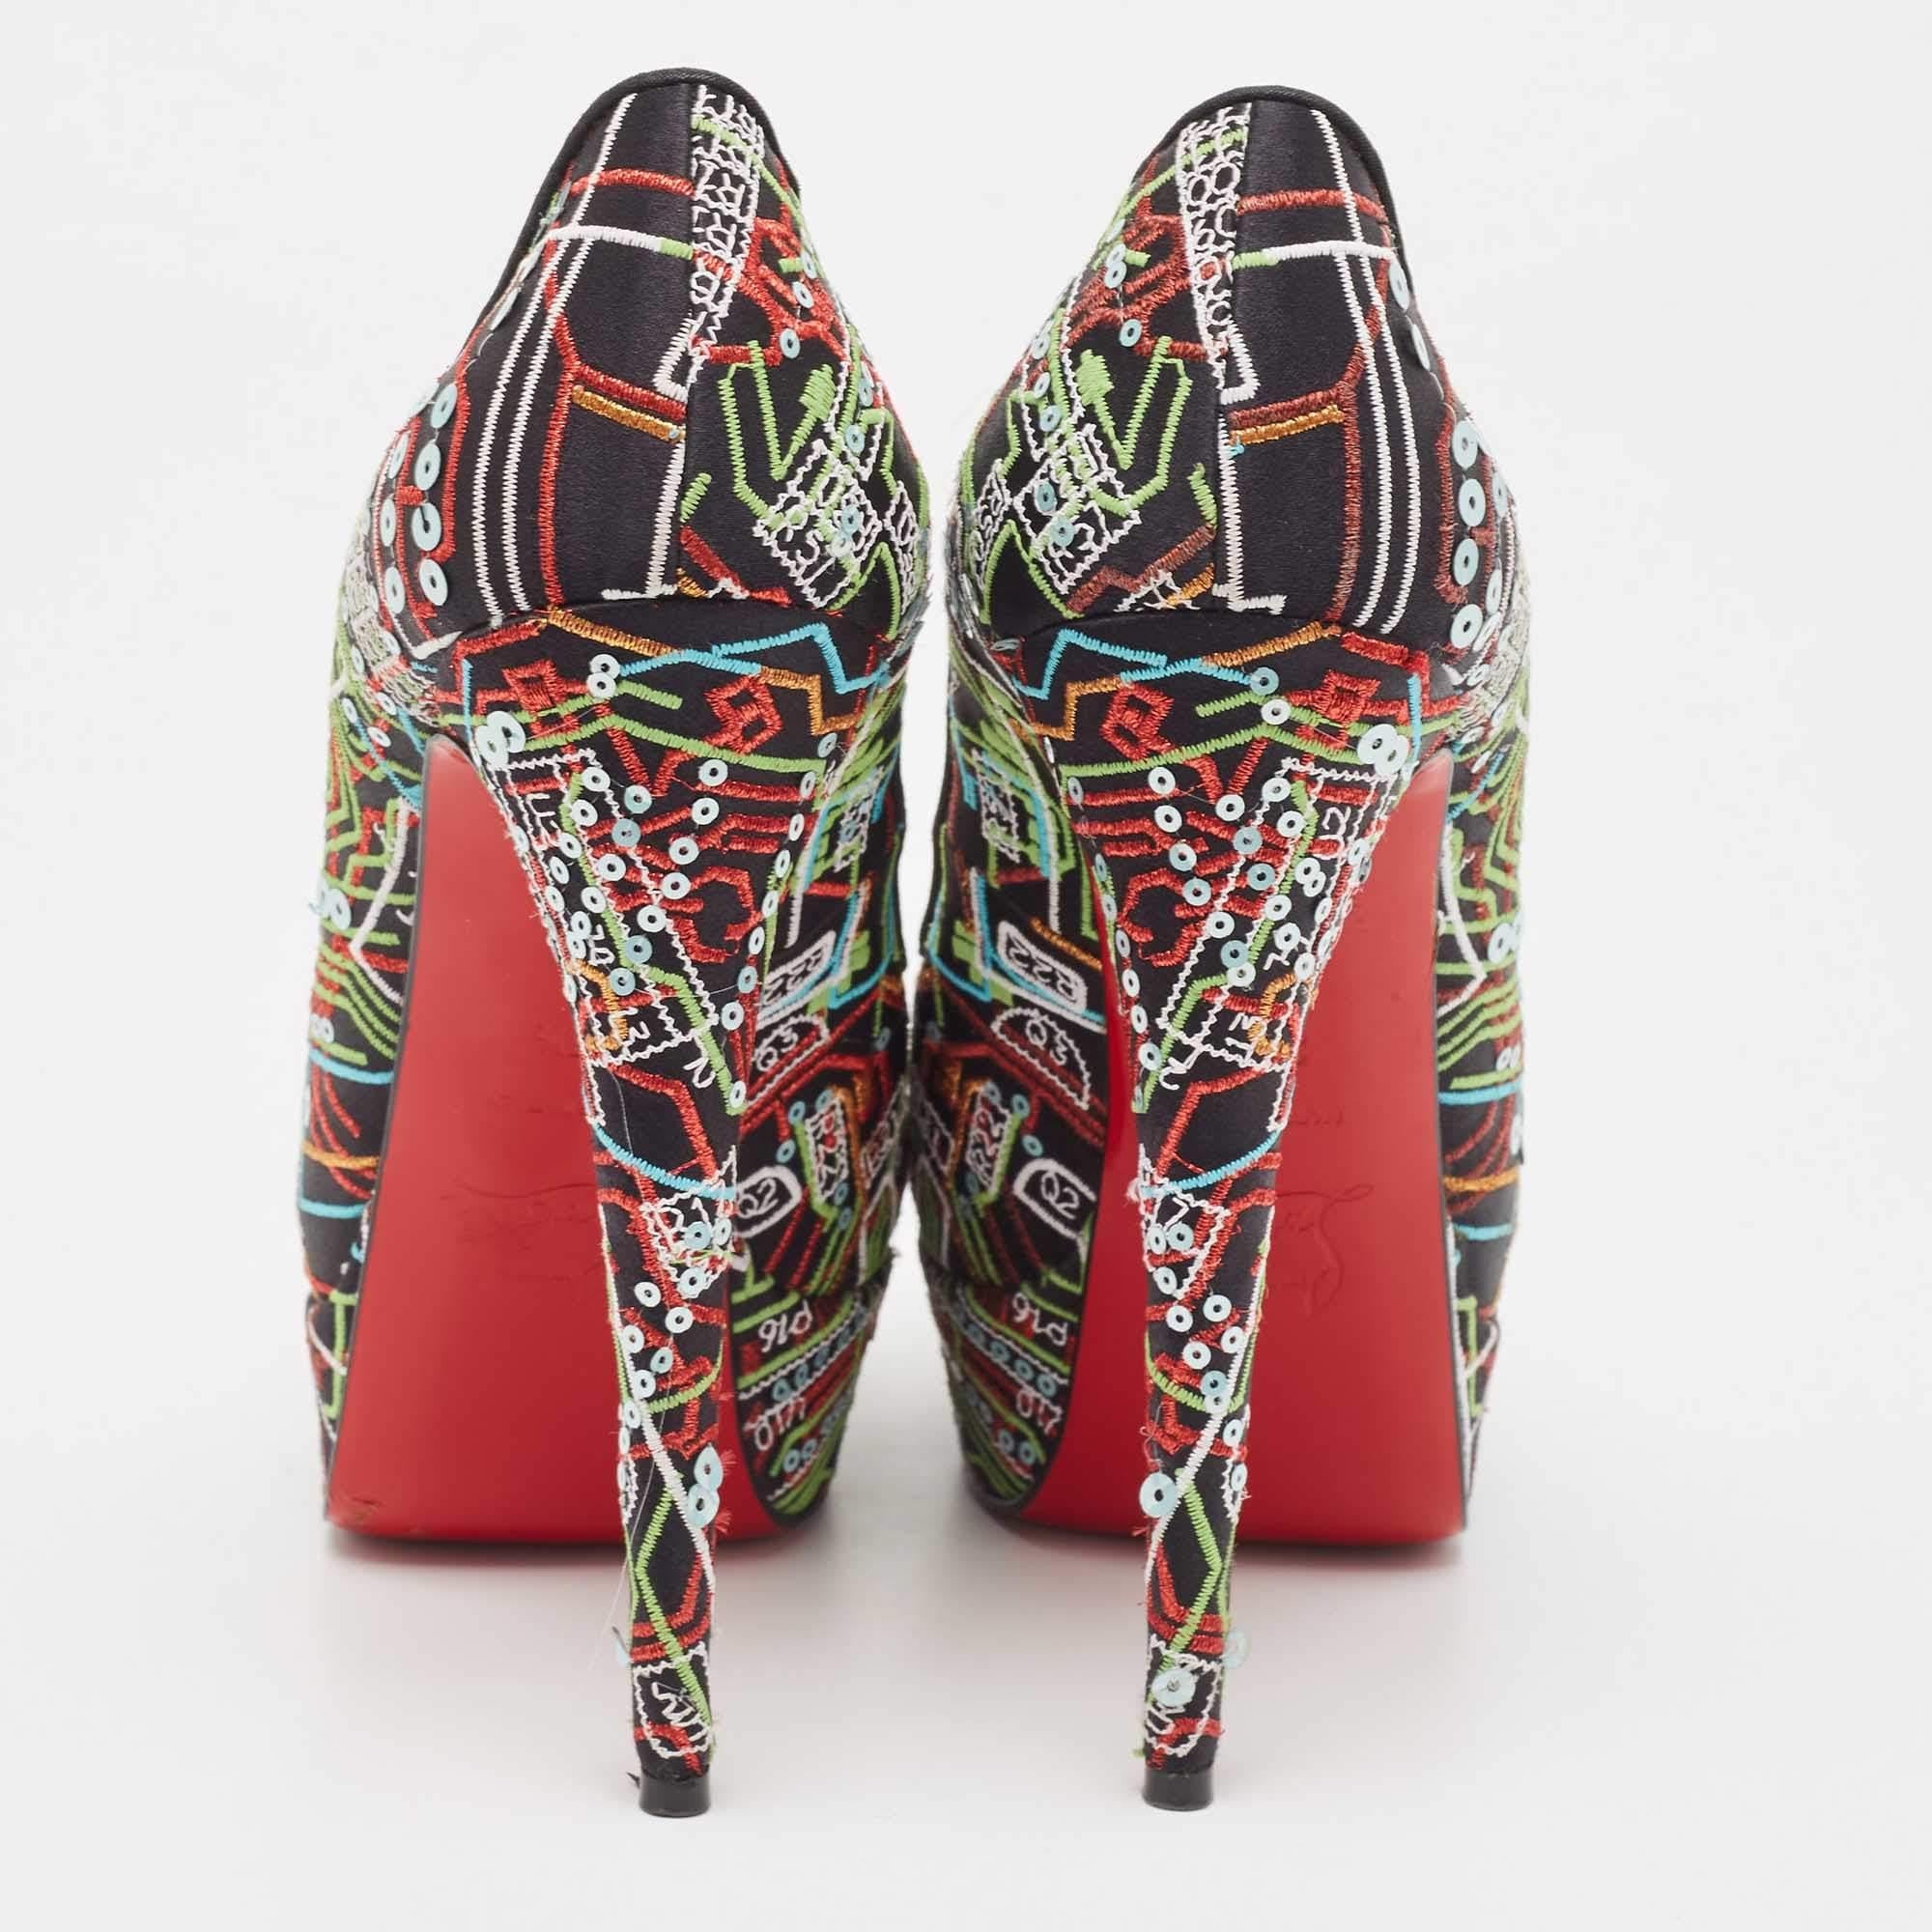 Christian Louboutin Satin and Sequin Embellishments Lady Peep Toe Pumps Size In Good Condition For Sale In Dubai, Al Qouz 2